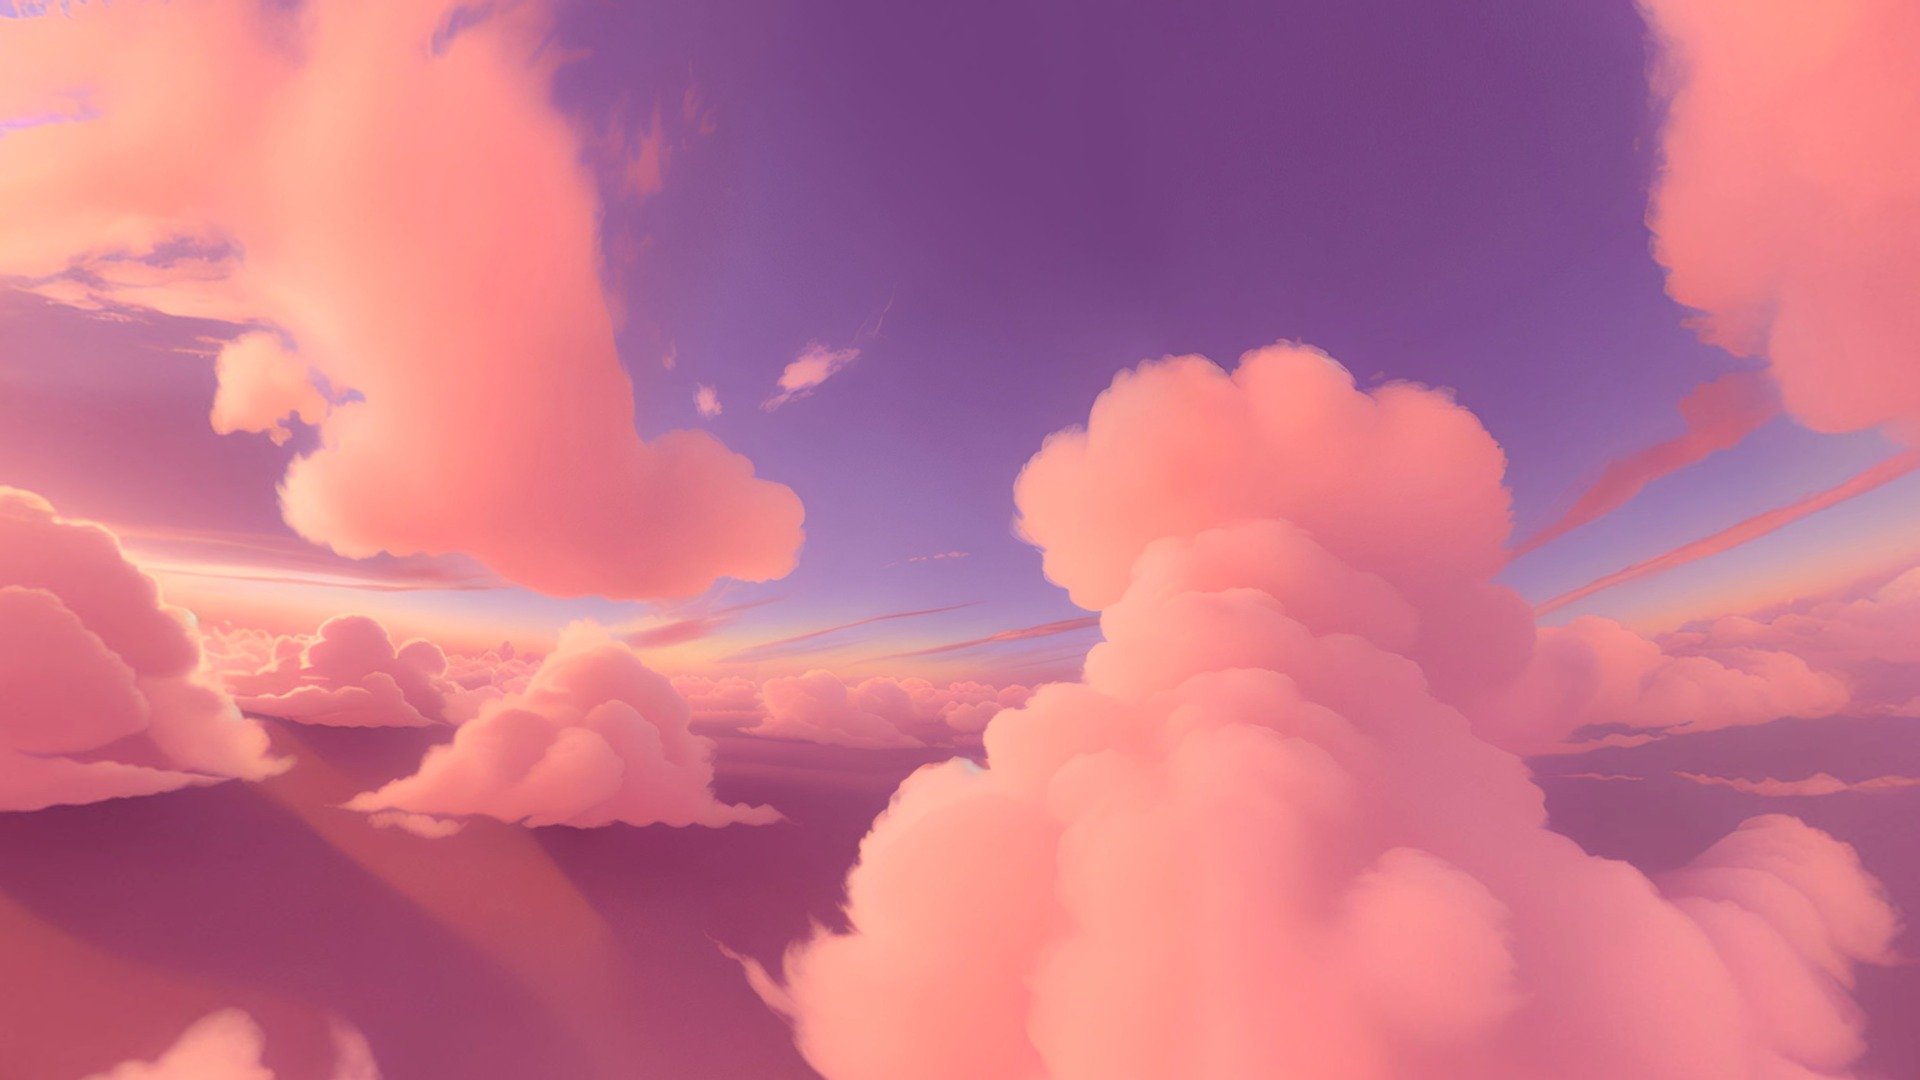 Beautiful stylized dreamy skybox. Perfect for beautiful, stylized environments and your rendering scene.

The package contains one panorama texture and one cubemap texture (png)

panorama texture: 8192 x 4096 

cubemap texture: 6144 x 4608 

Because of this size it is easier to customize more and better details if you want that. 

The sizes can be changed in your graphics program as desired

( textures are under Other available downloads)

used: AI, Photoshop

*-------------Terms of Use--------------

Commercial use of the assets provided is permitted but cannot be included in an asset pack or sold at any sort of asset/resource marketplace or be shared for free* - Stylized Cloudy Sky 011 - Buy Royalty Free 3D model by stylized skybox (@skybox_) 3d model